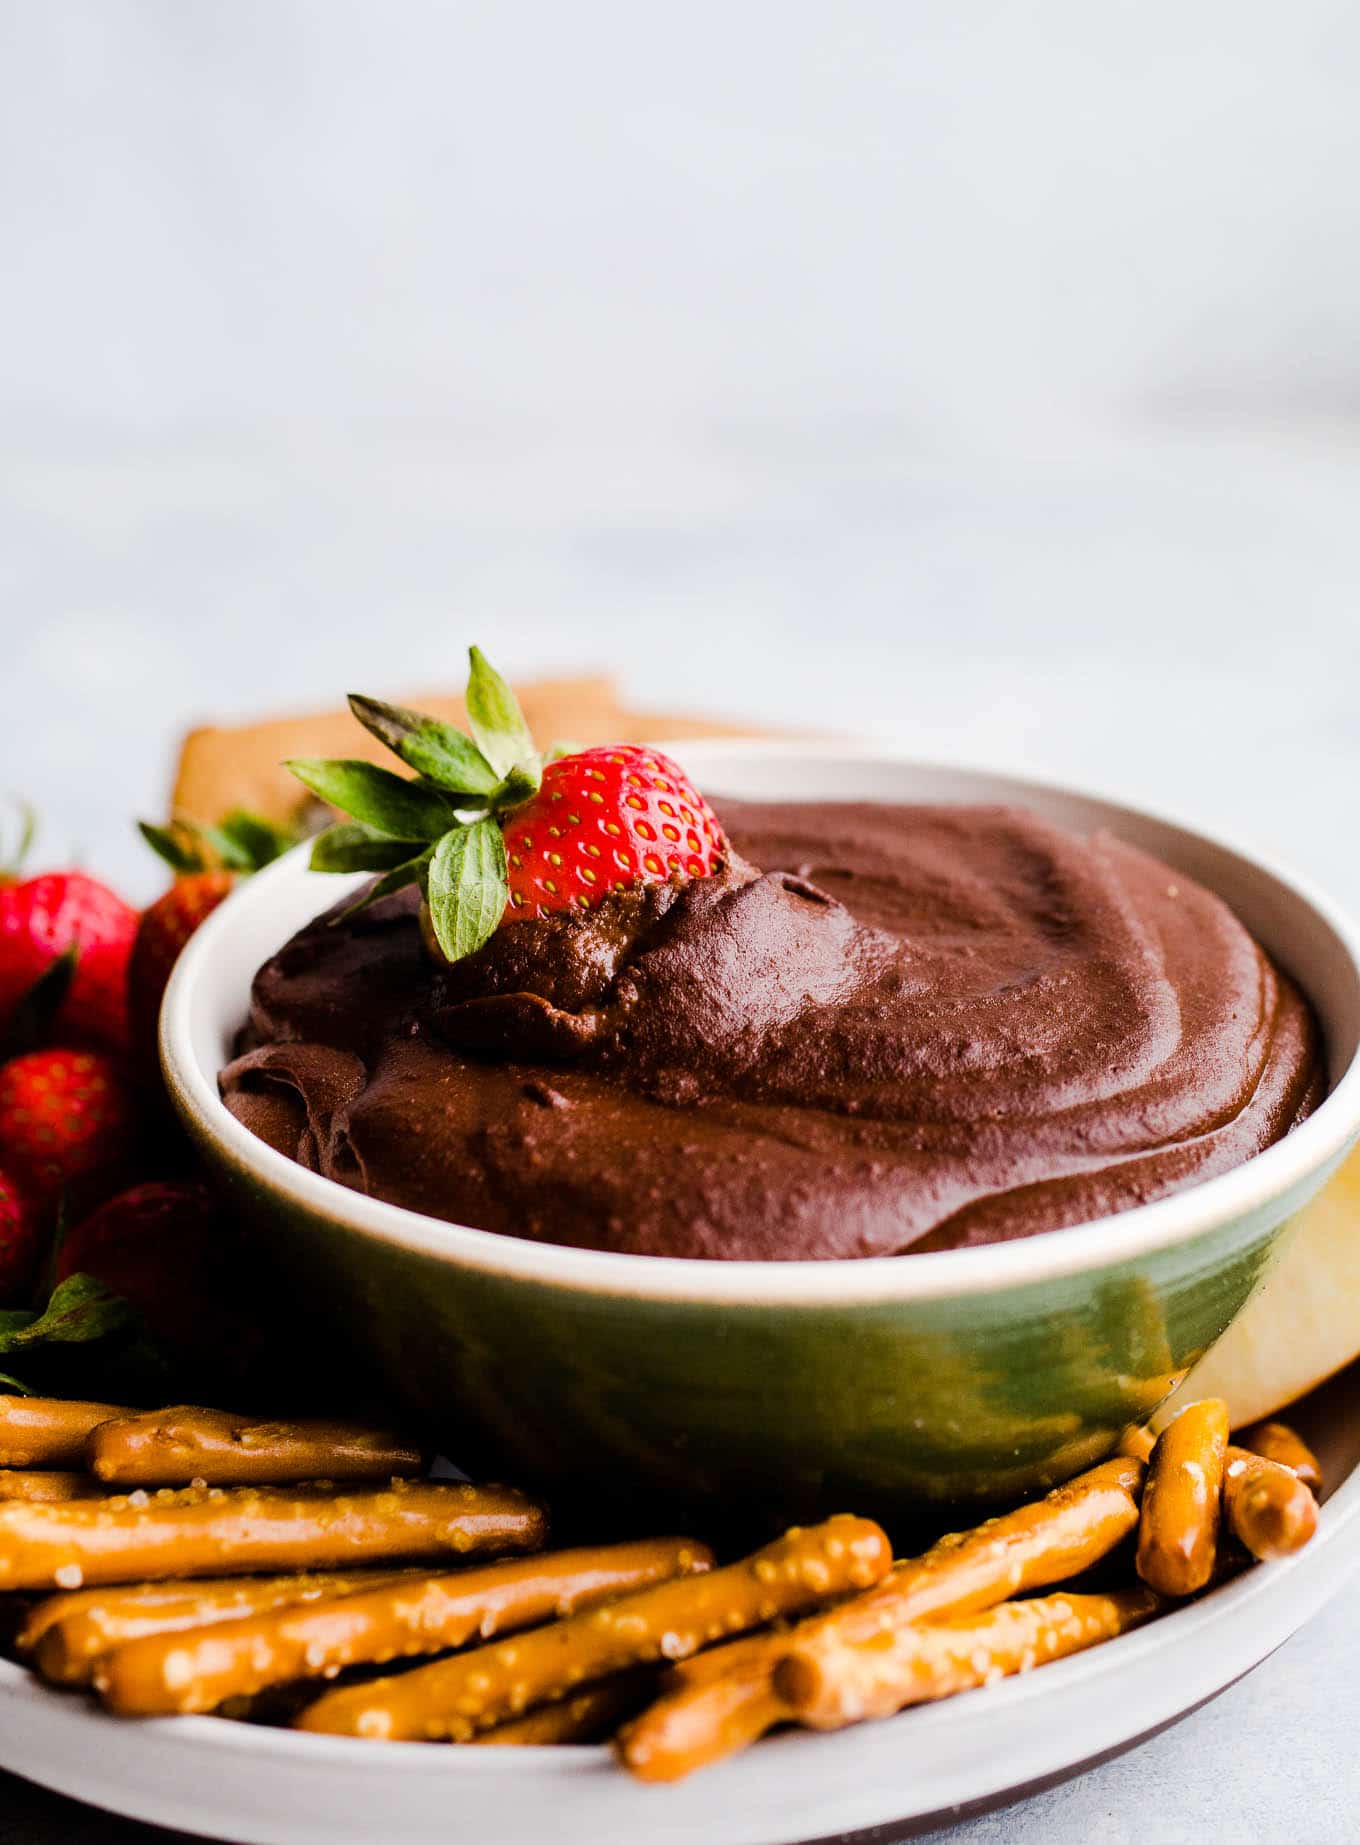 Chocolate dip in a bowl with strawberries and pretzels.